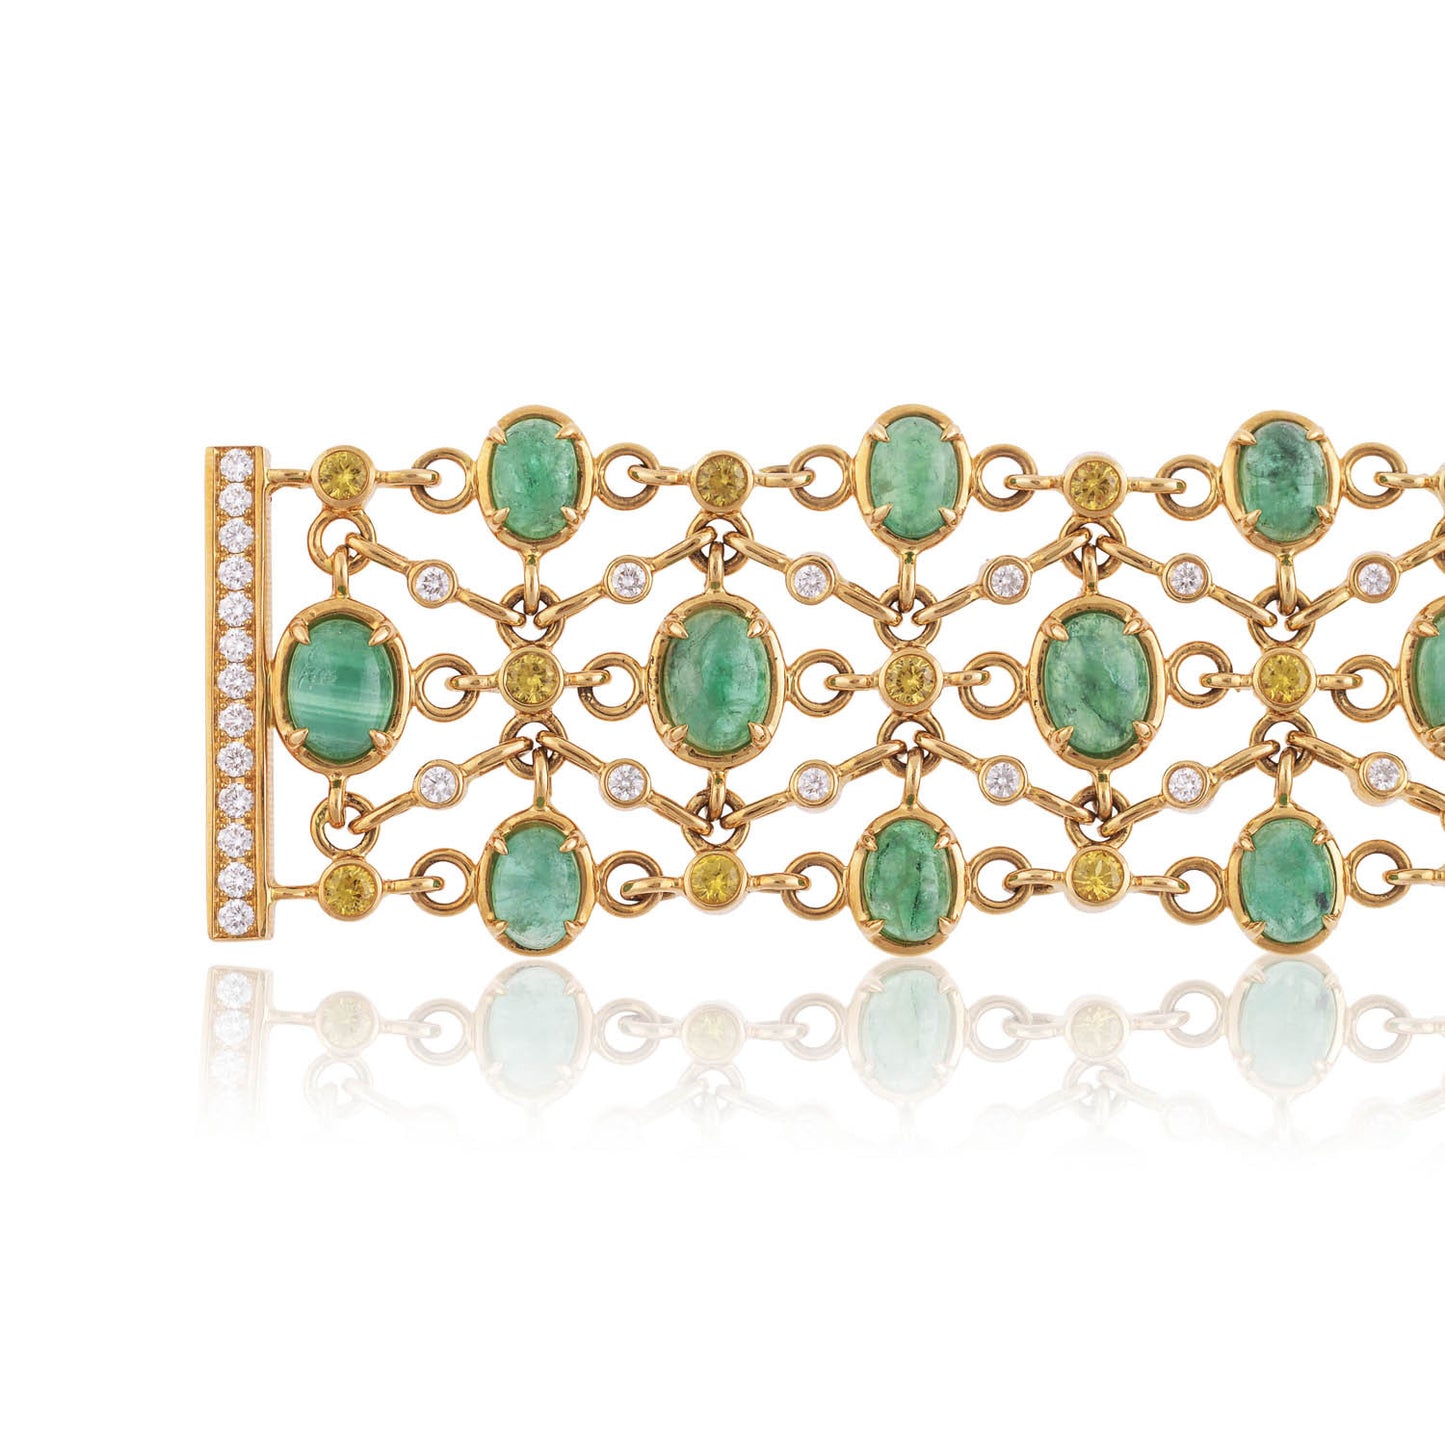 Brazilian Emeralds, diamond and sapphire bracelet pictured open with clasp created by Esther McFarlane for McFarlane Fine Jewellery